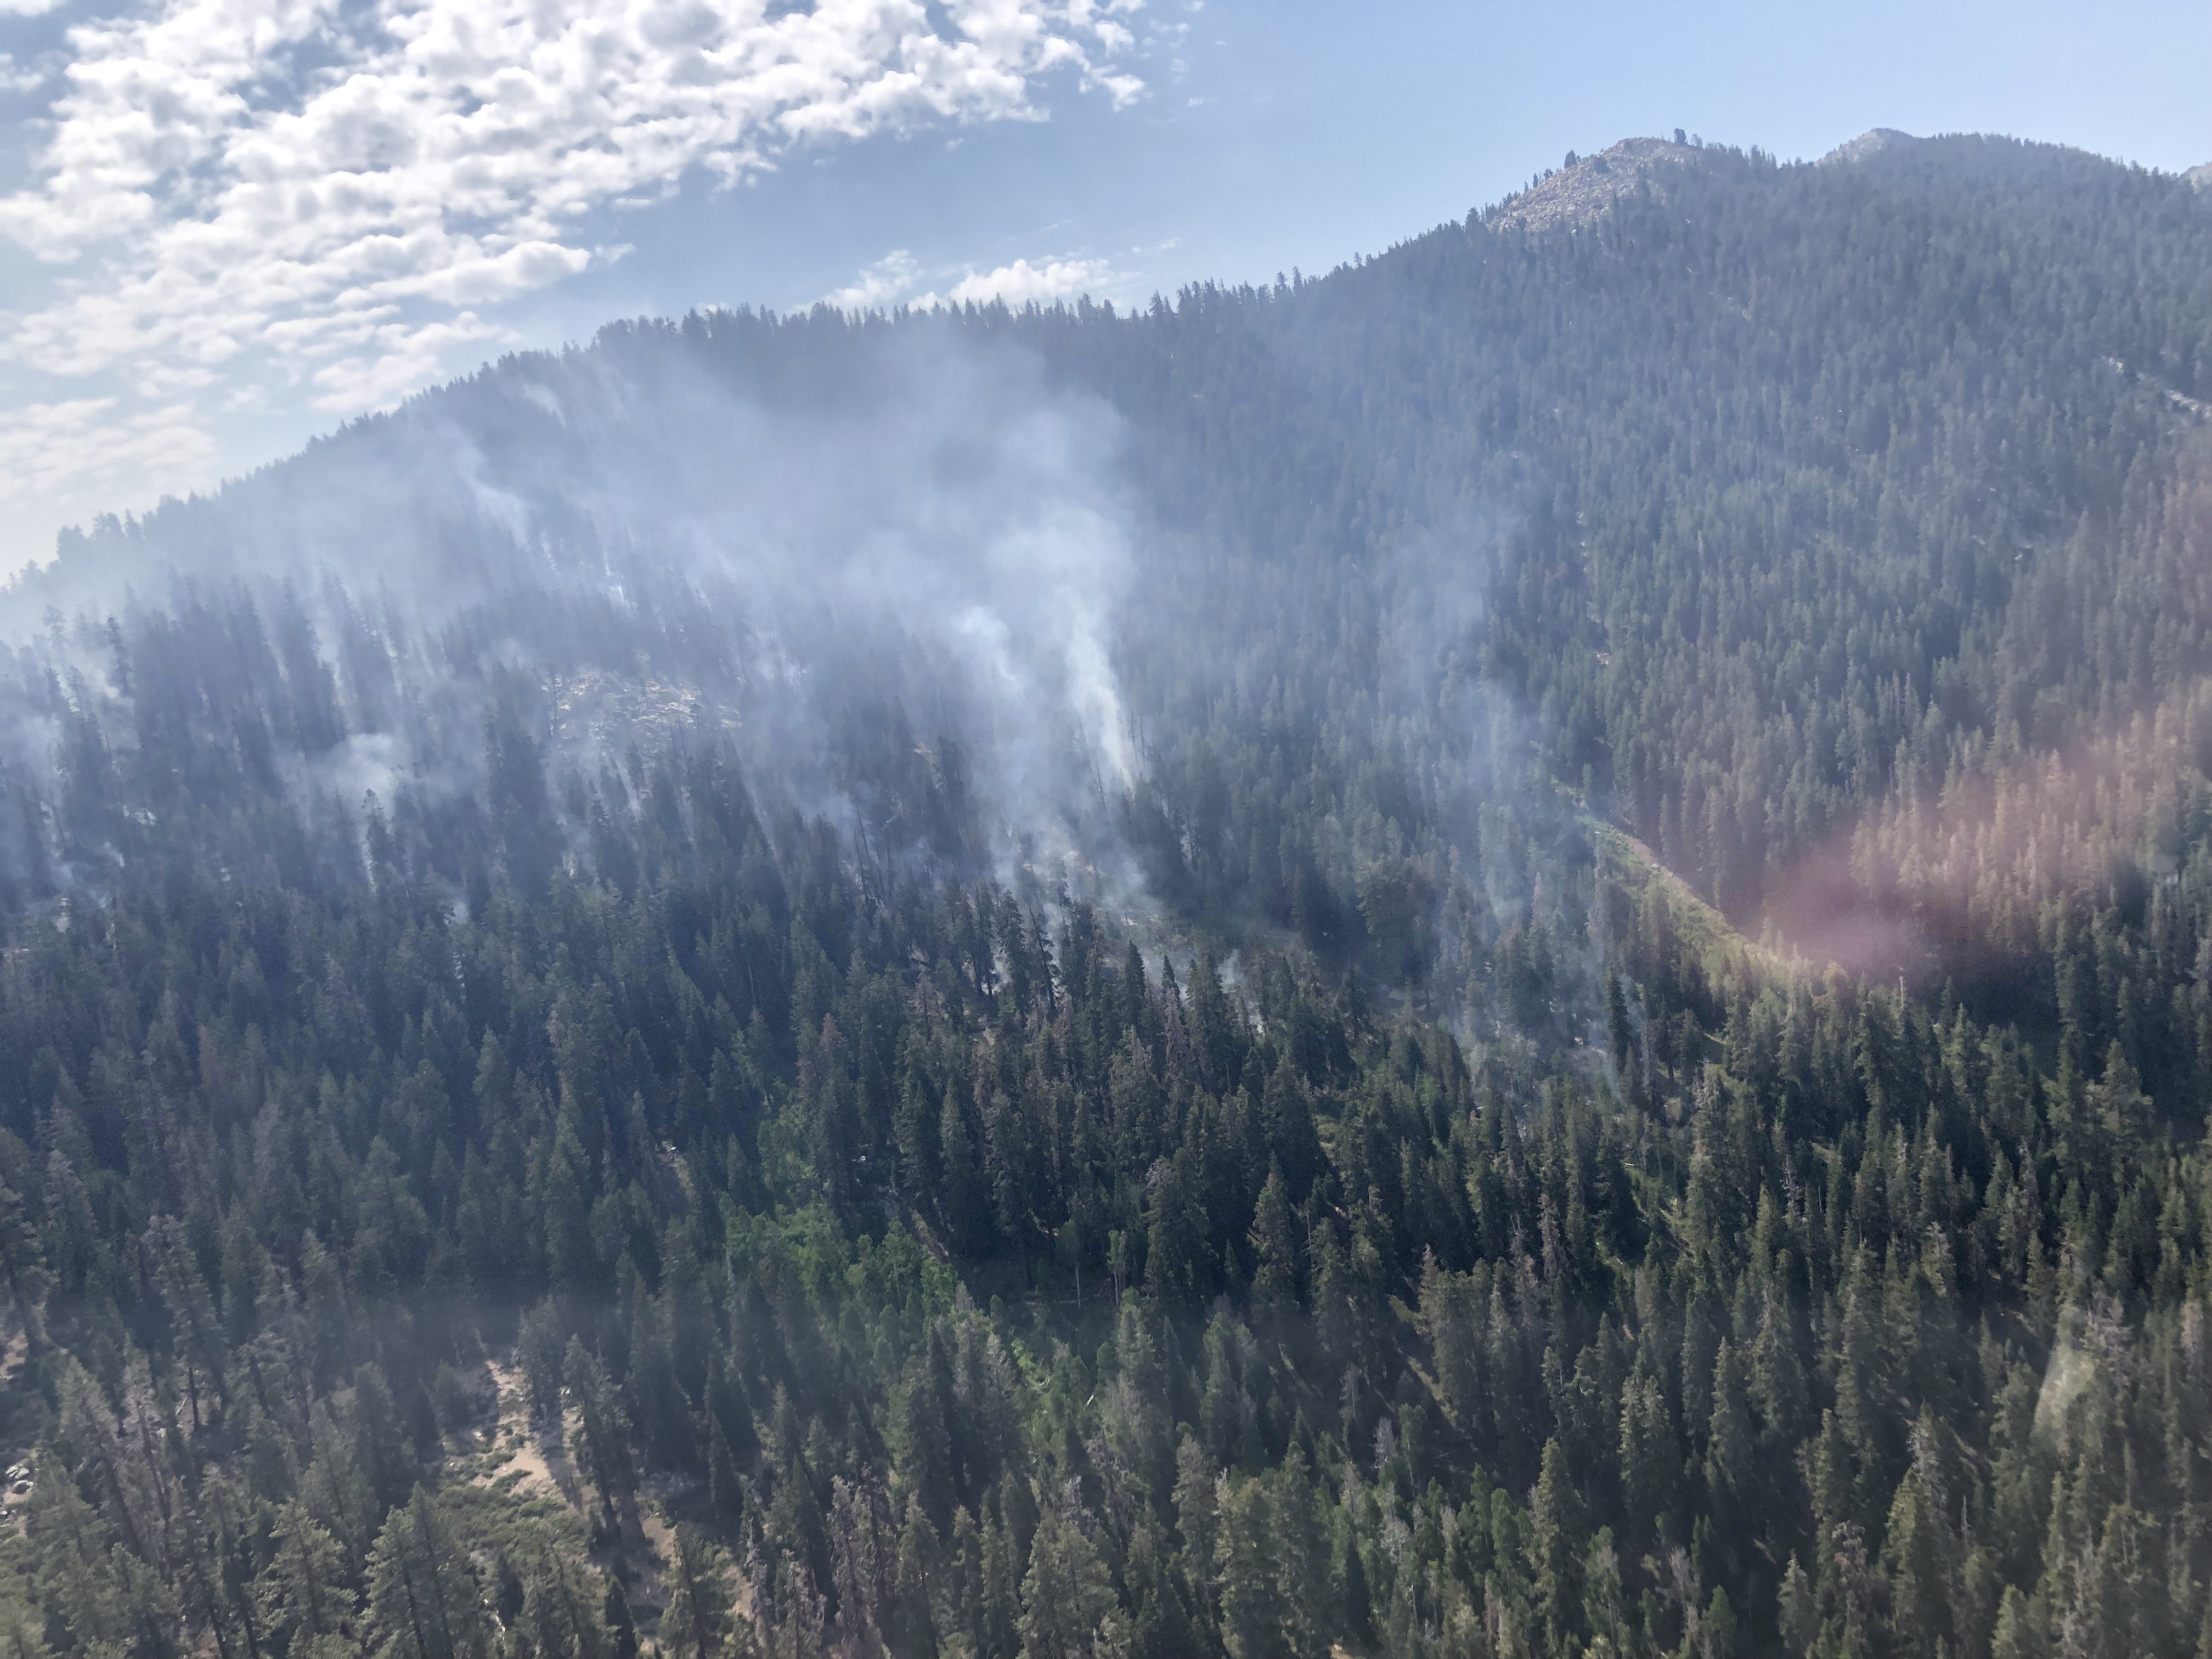 Smoke rises from a rugged forested mountainside